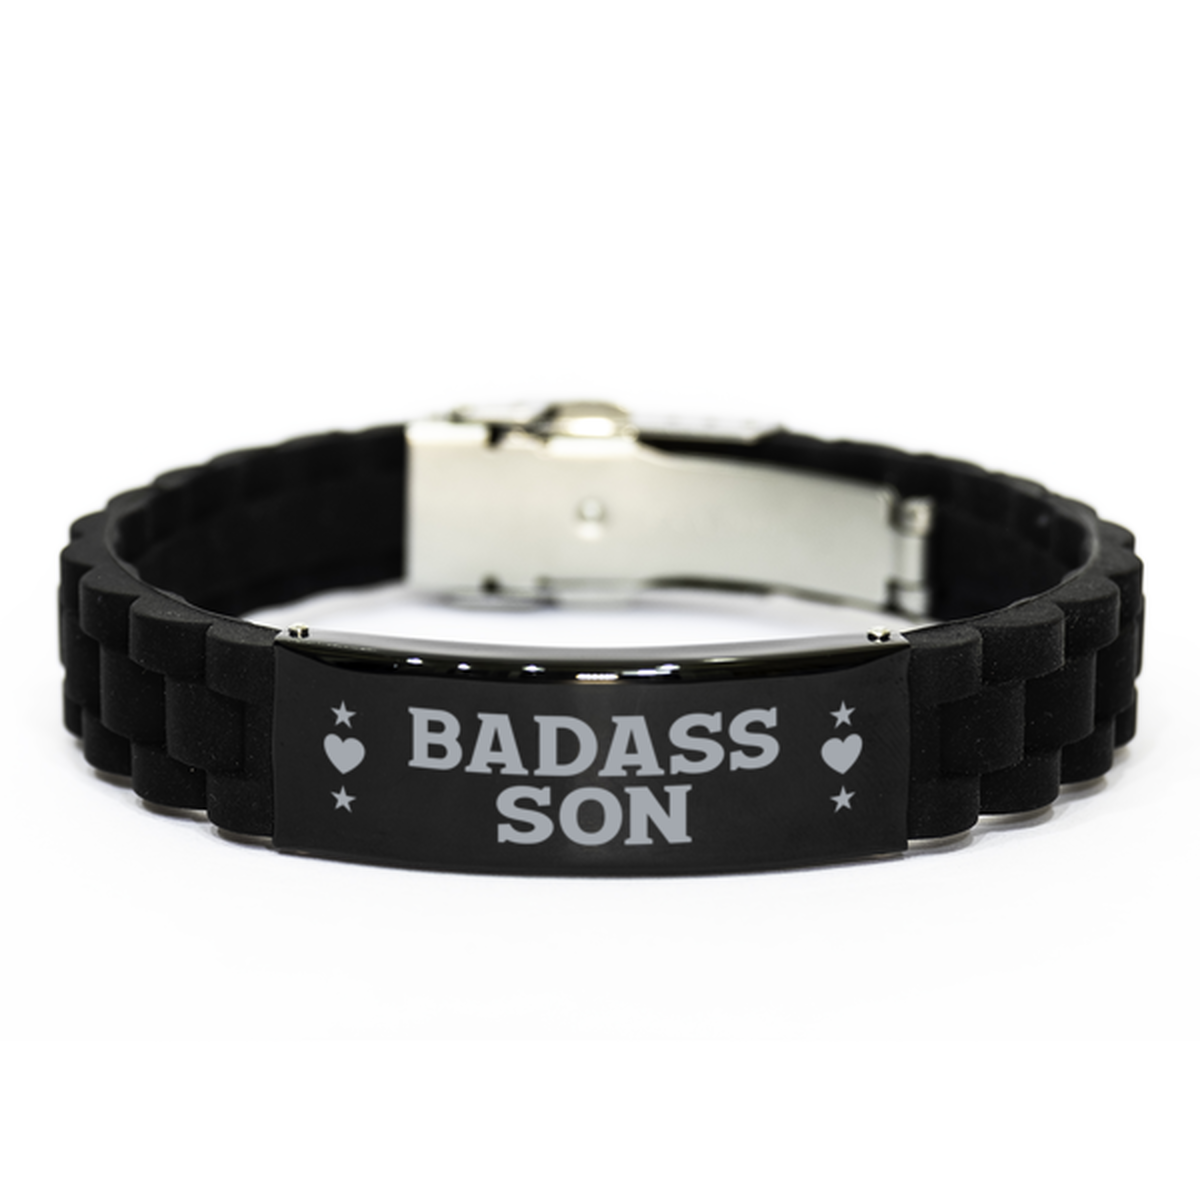 Son Black Bracelet, Badass Son, Funny Family Gifts For Son From Dad Mom